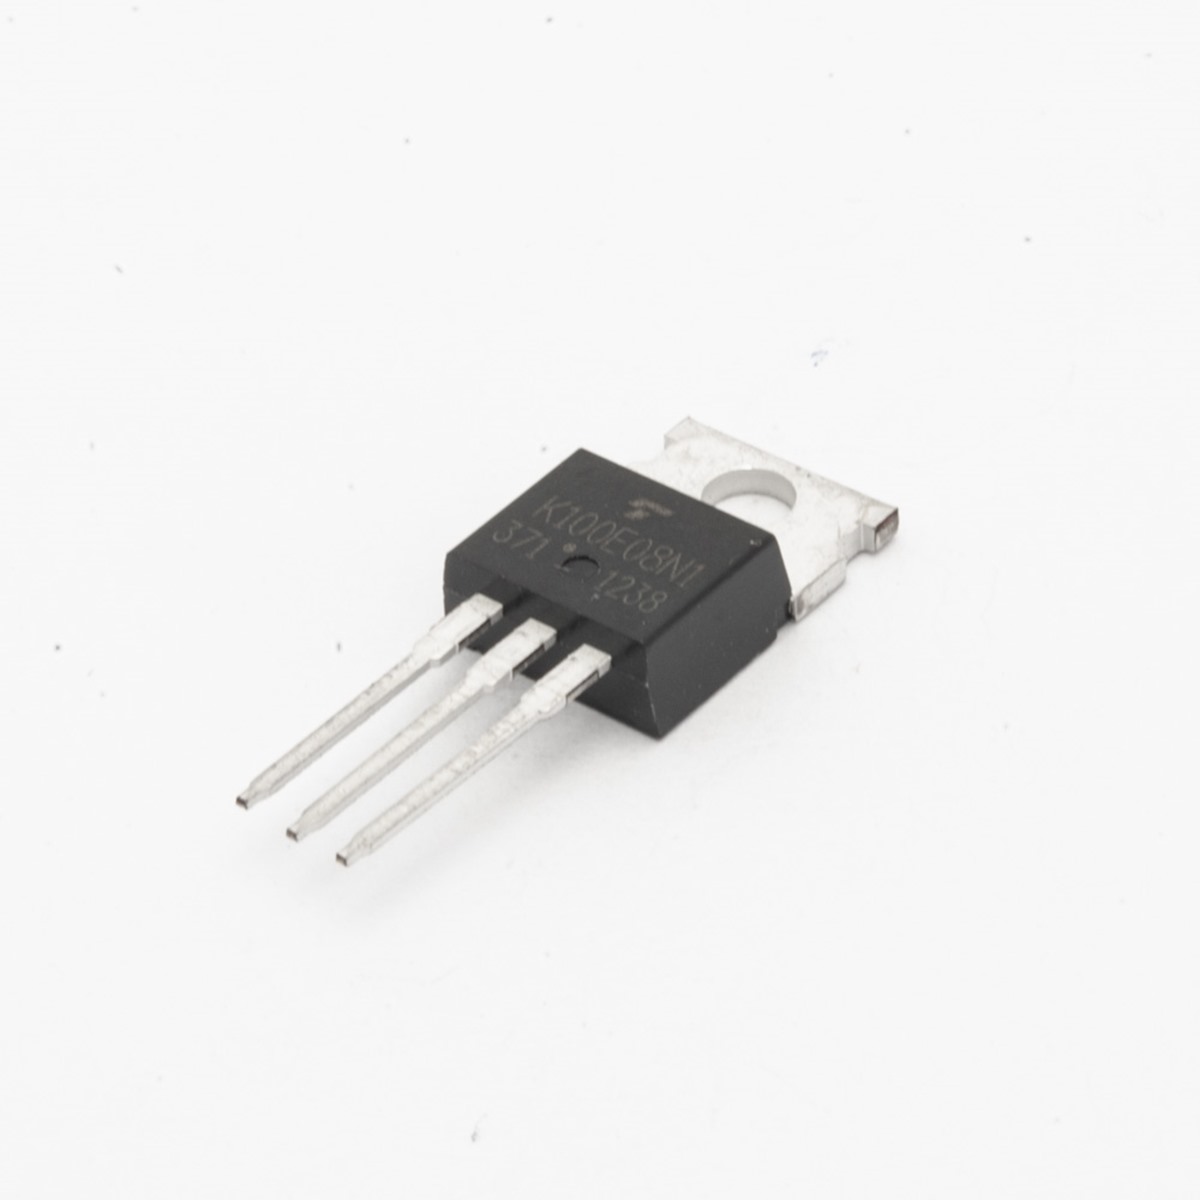 K100E08N1 TO-220 MOSFET